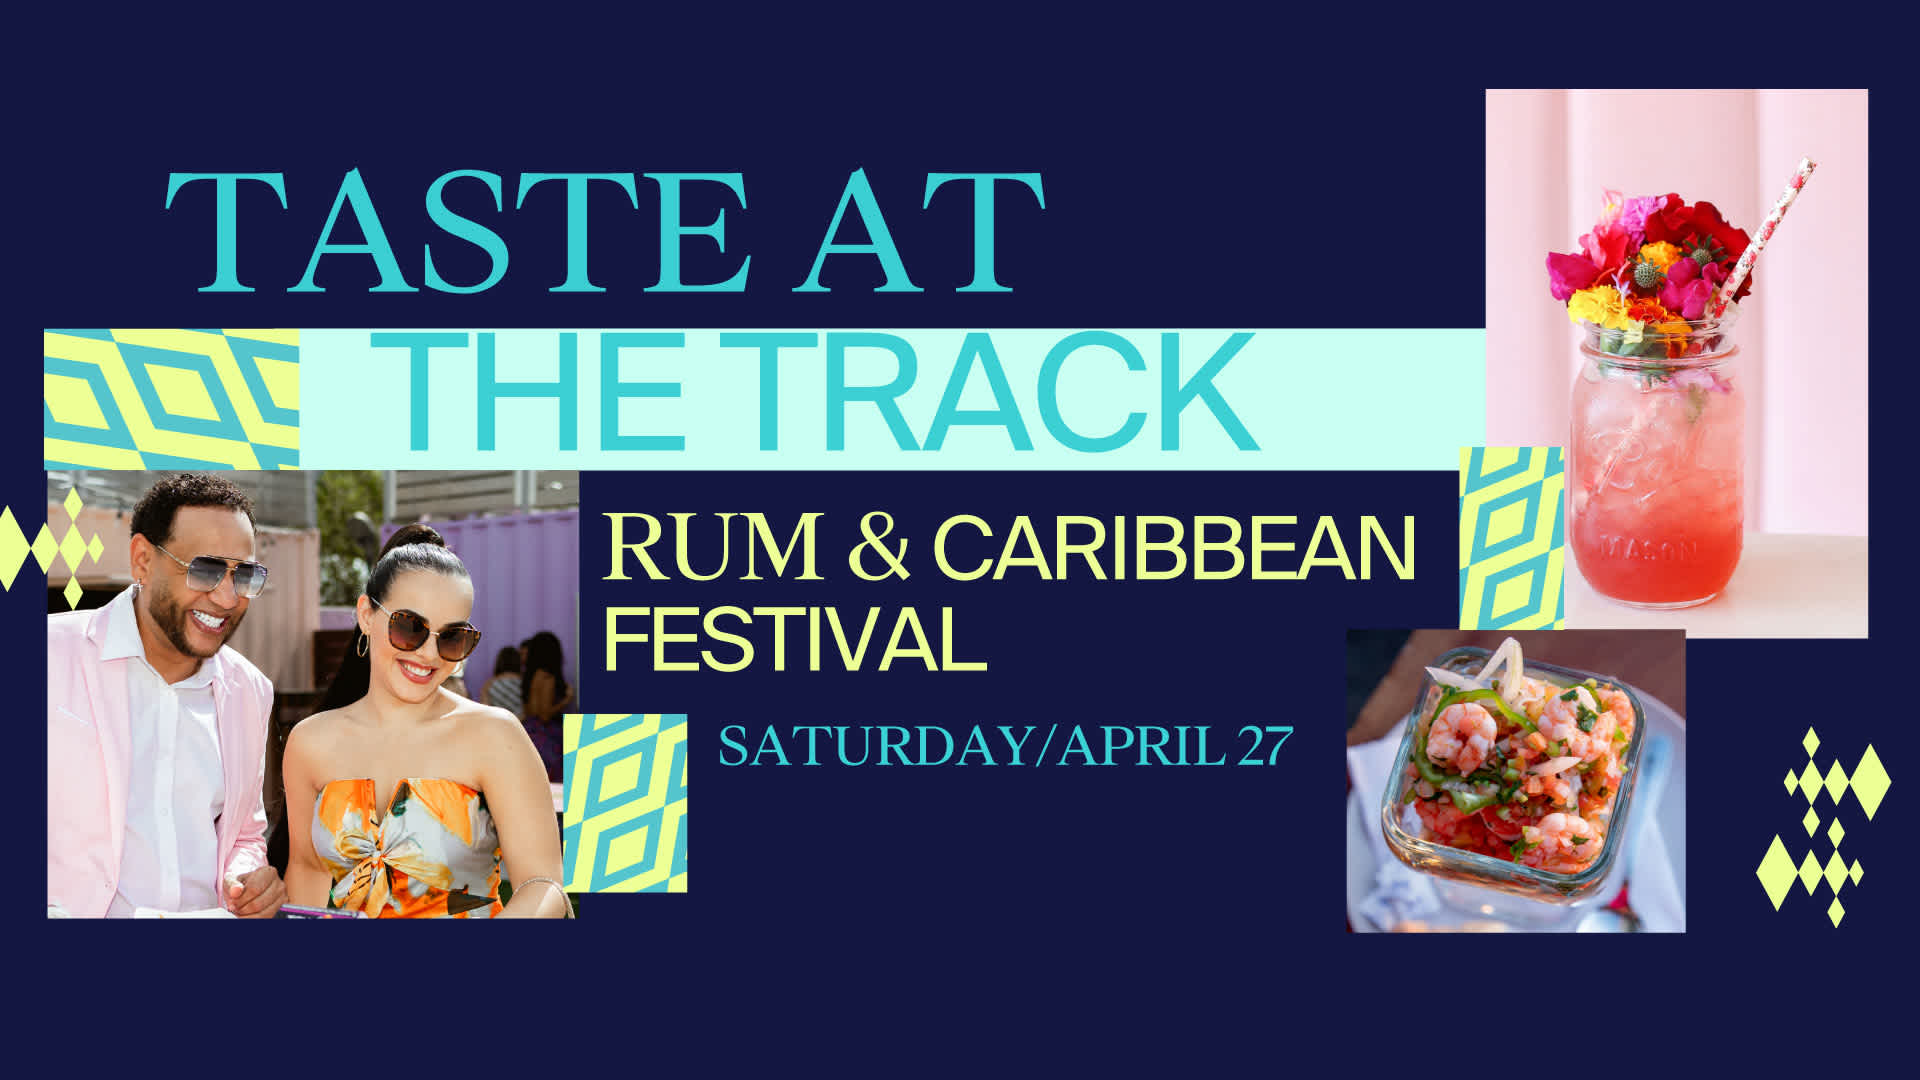 Taste at the Track Rum and Caribbean Festival